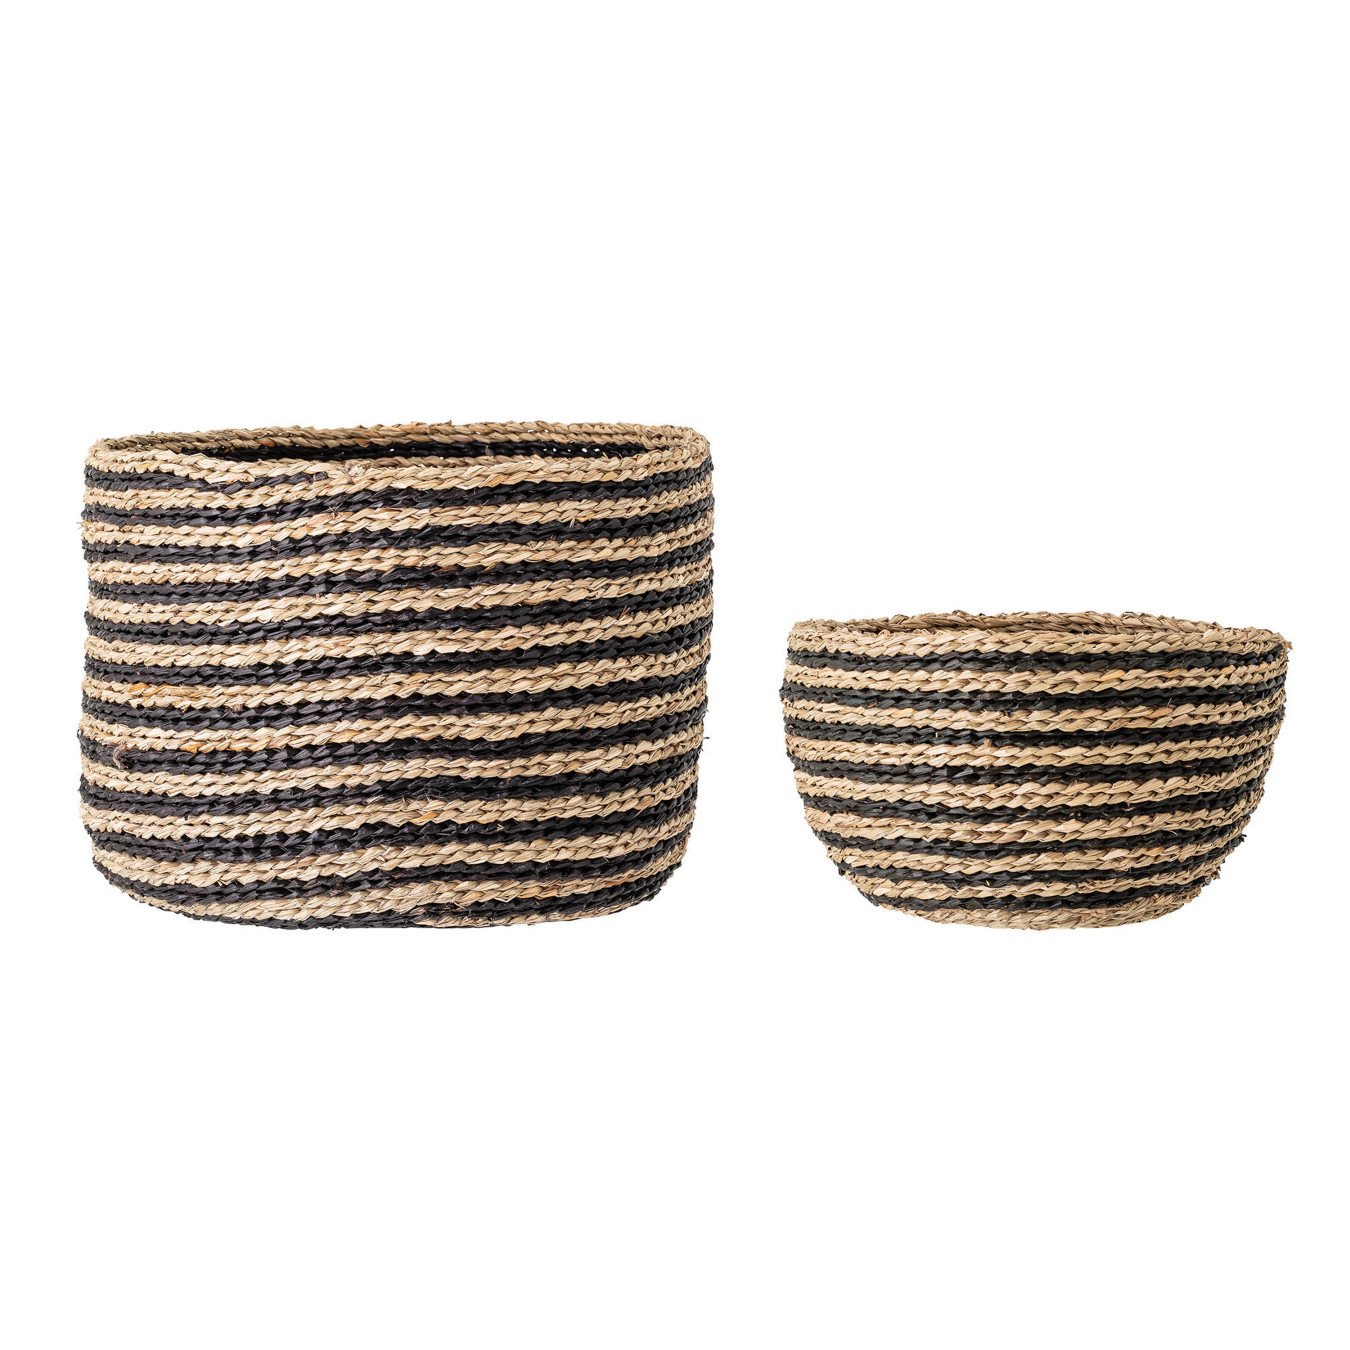 Handwoven Striped Seagrass Baskets (Set of 2 Sizes)